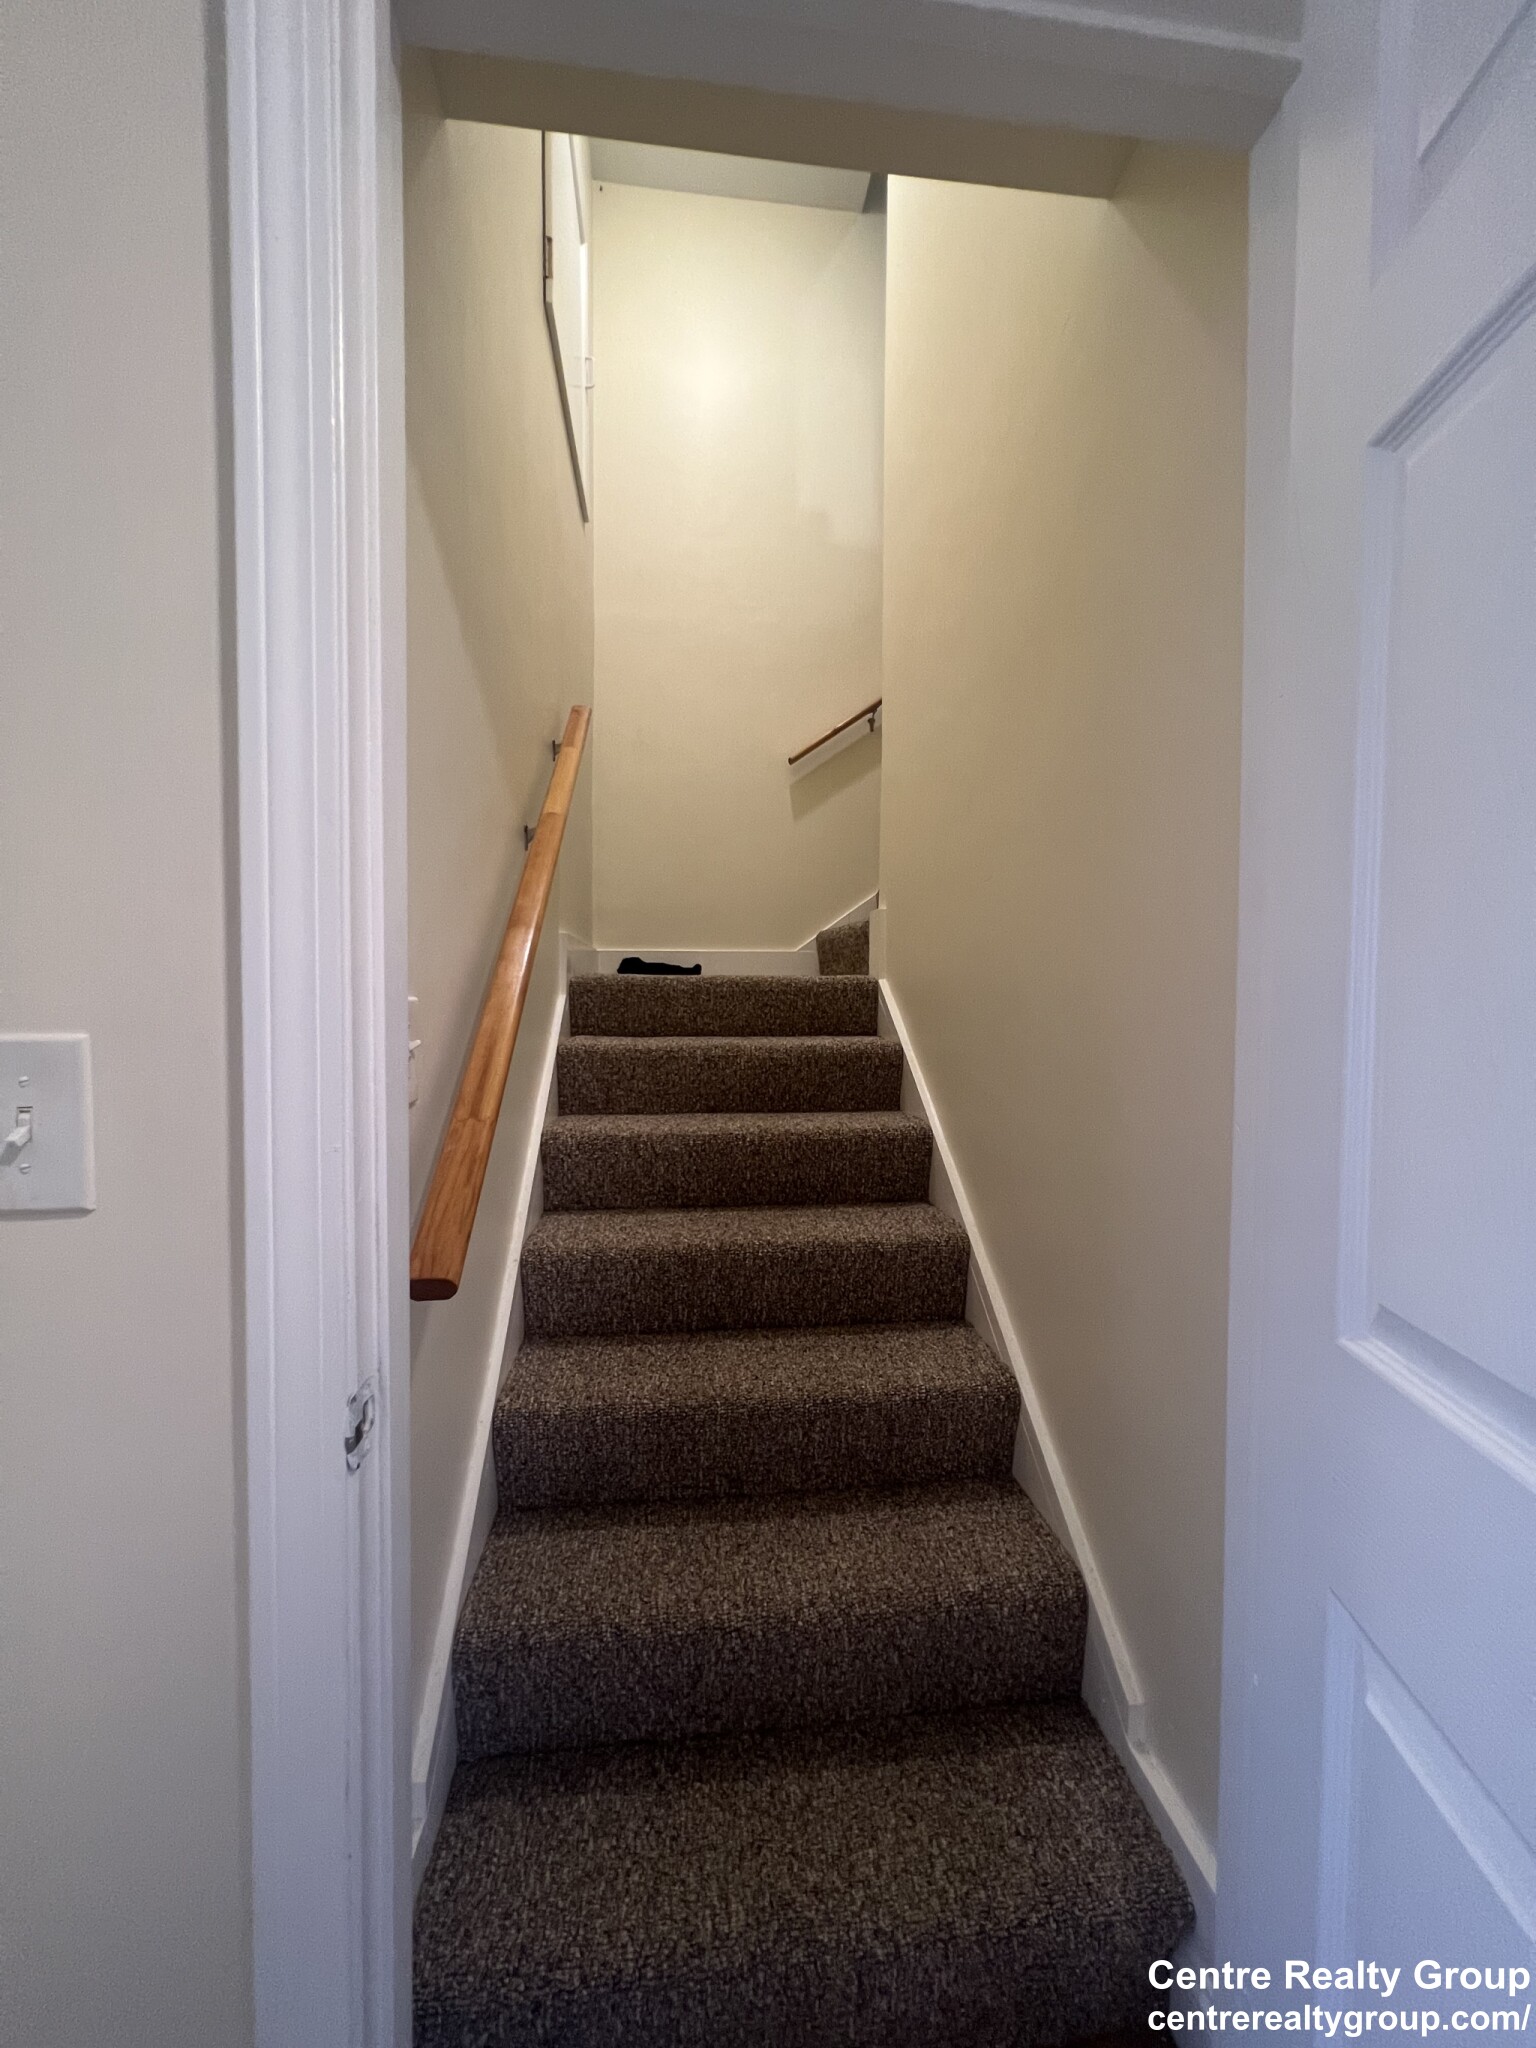 Photos of apartment on South St.,Waltham MA 02453